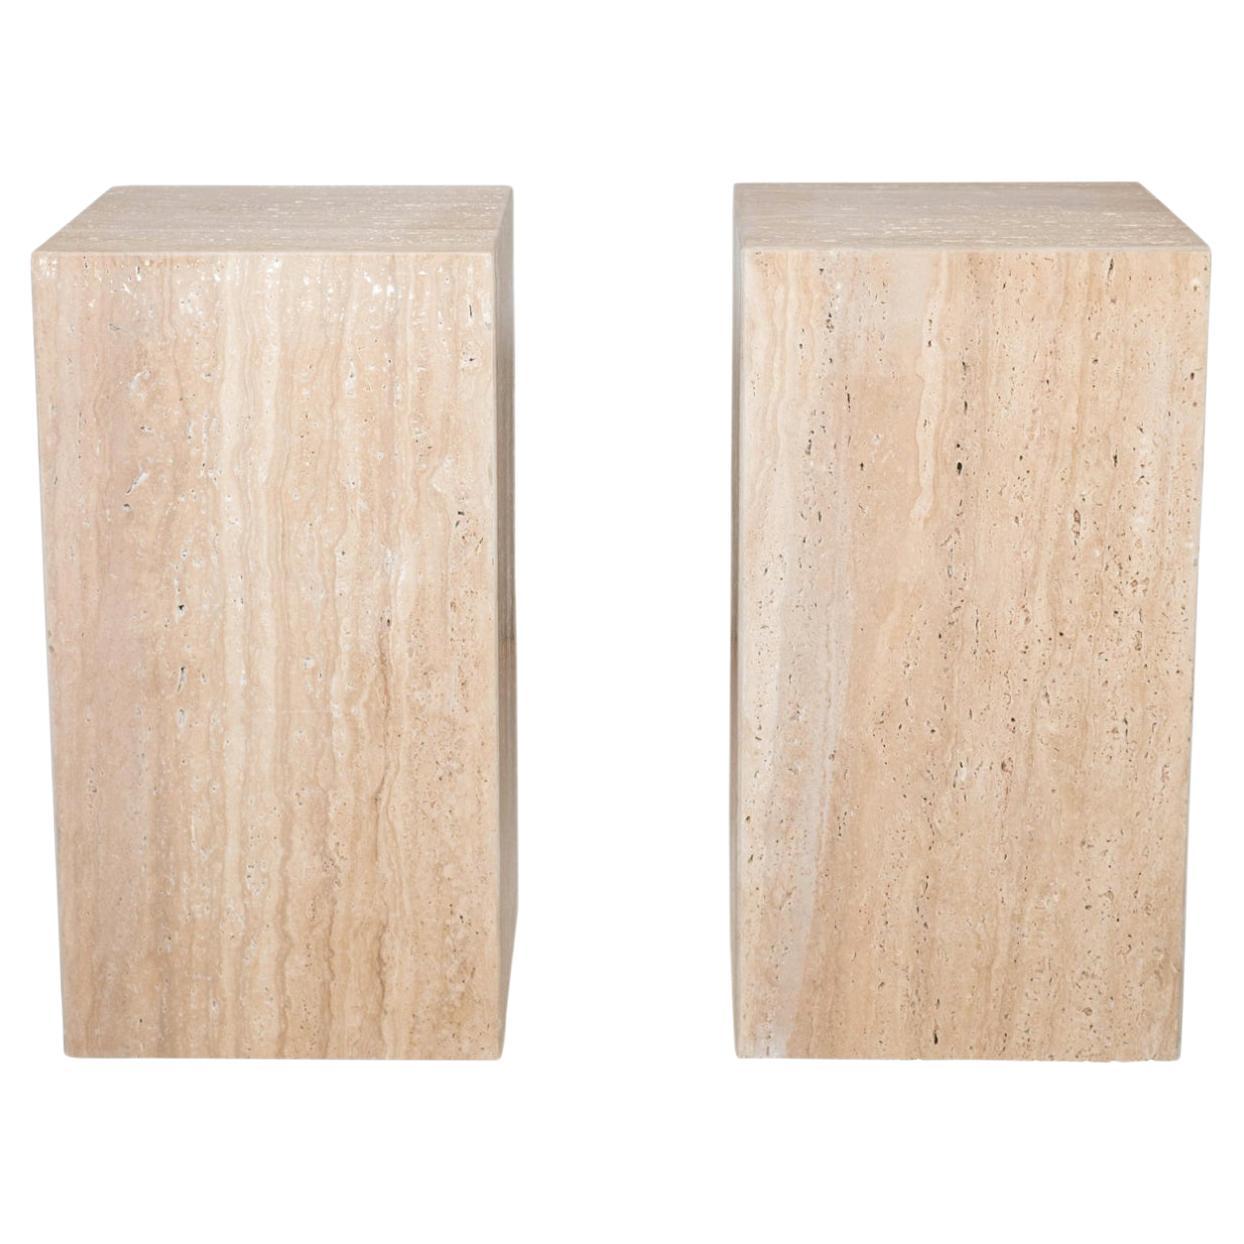 1980s Italian Travertine Tower Cube Side Tables - a Pair For Sale